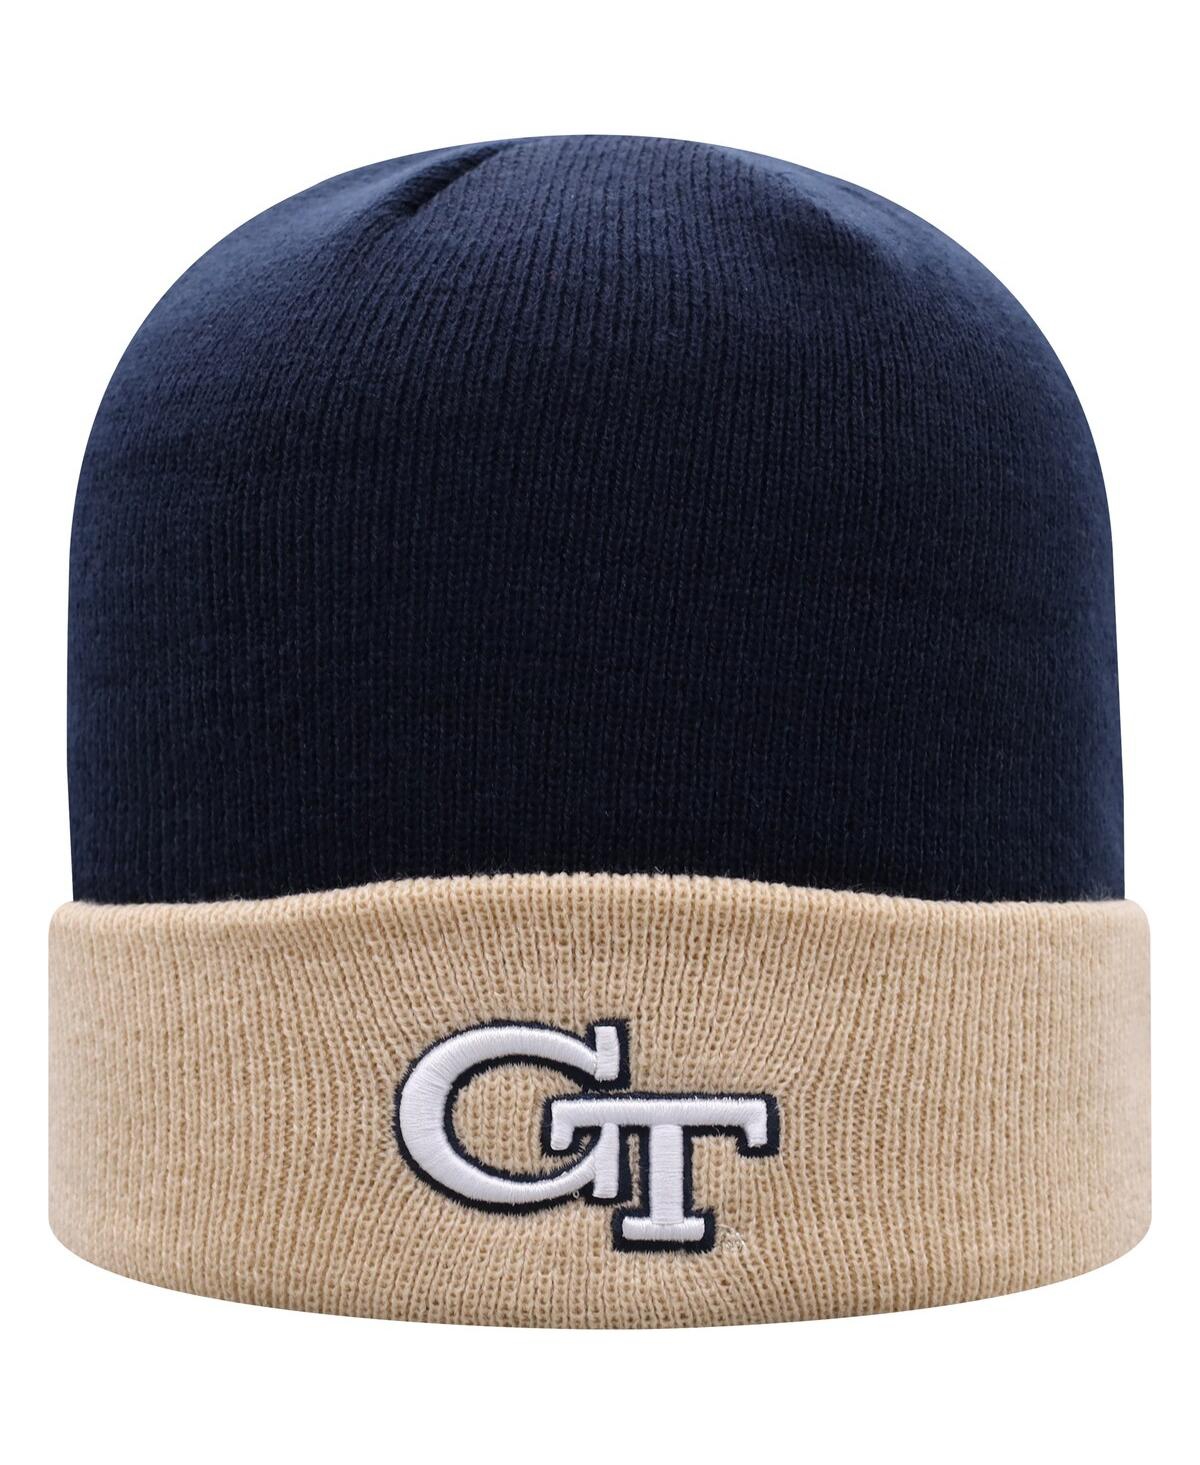 Men's Navy and Gold Georgia Tech Yellow Jackets Core 2-Tone Cuffed Knit Hat - Navy, Gold